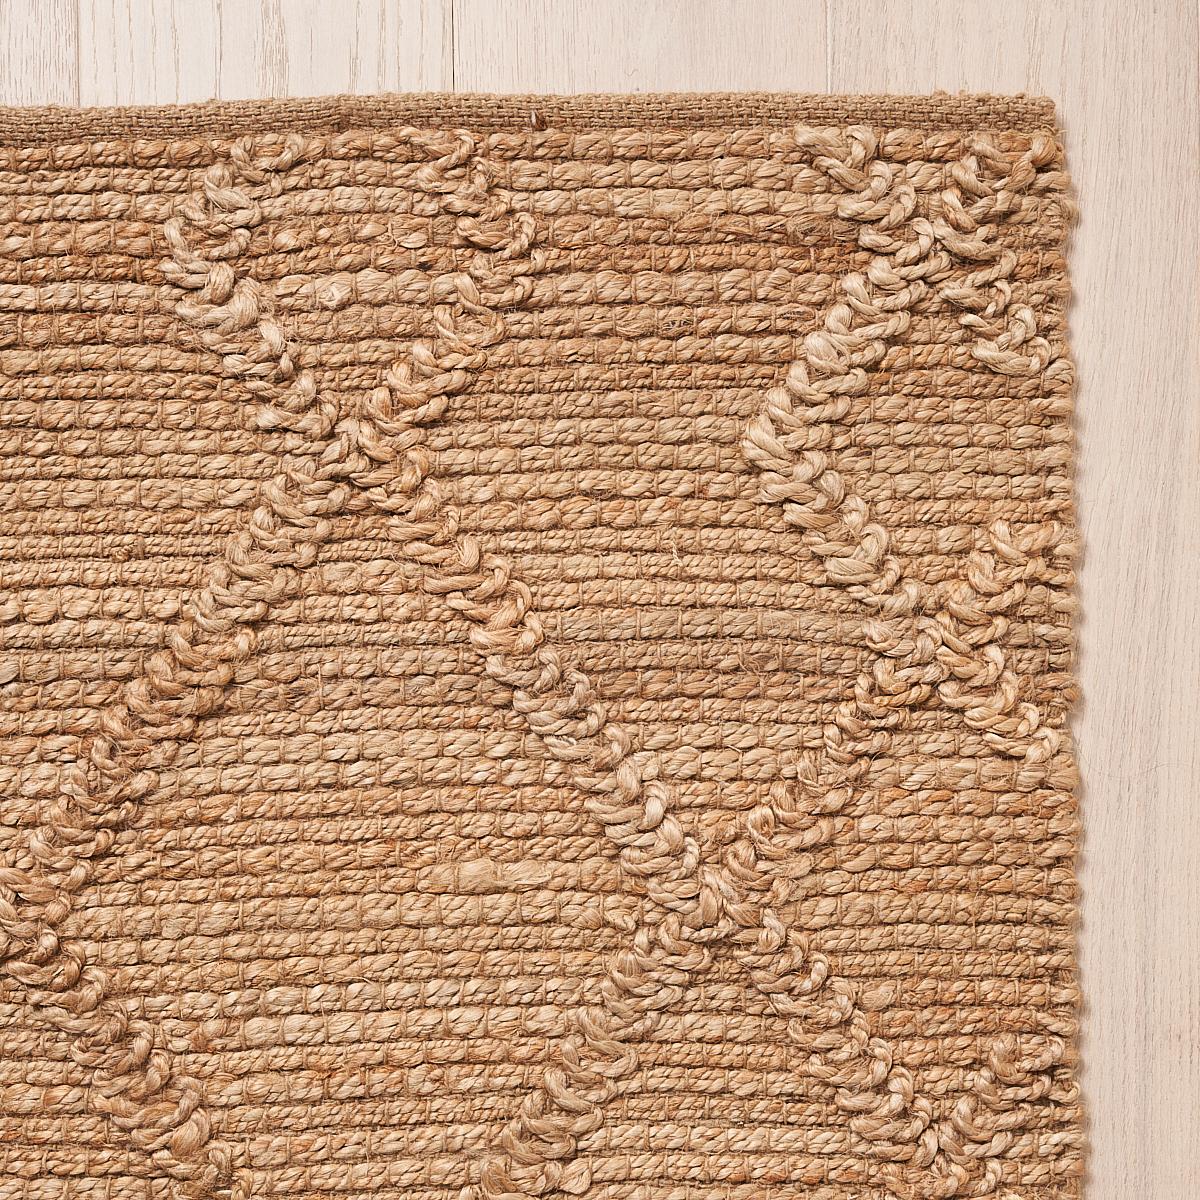 This rug will ship in December. A substantial flatweave made of 100% jute, Branson offers a textural lattice design with fabulous tonal variations. Inspired by our Branson Embroidery fabric, this stylish geometric pattern is equally at home in